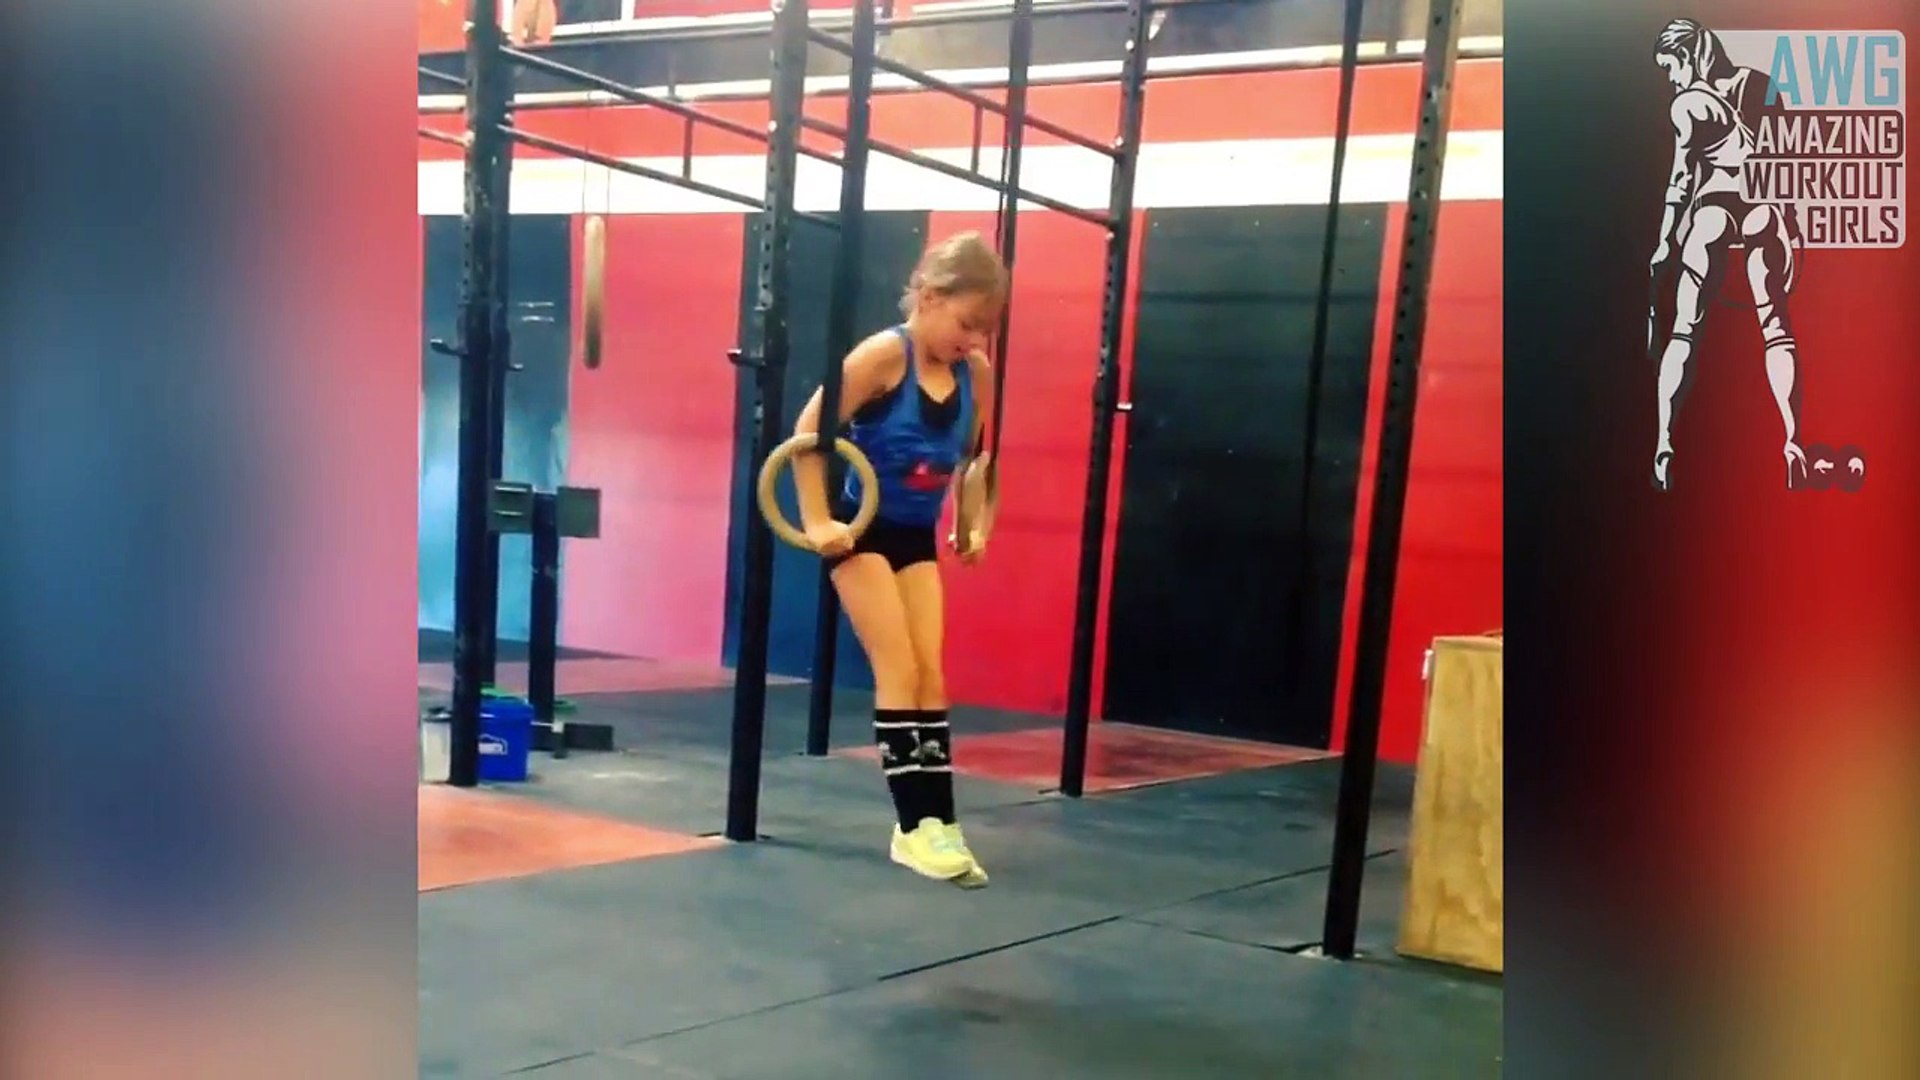 Amazing Workout - Crossfit little girl queen beezy13 _ AWG